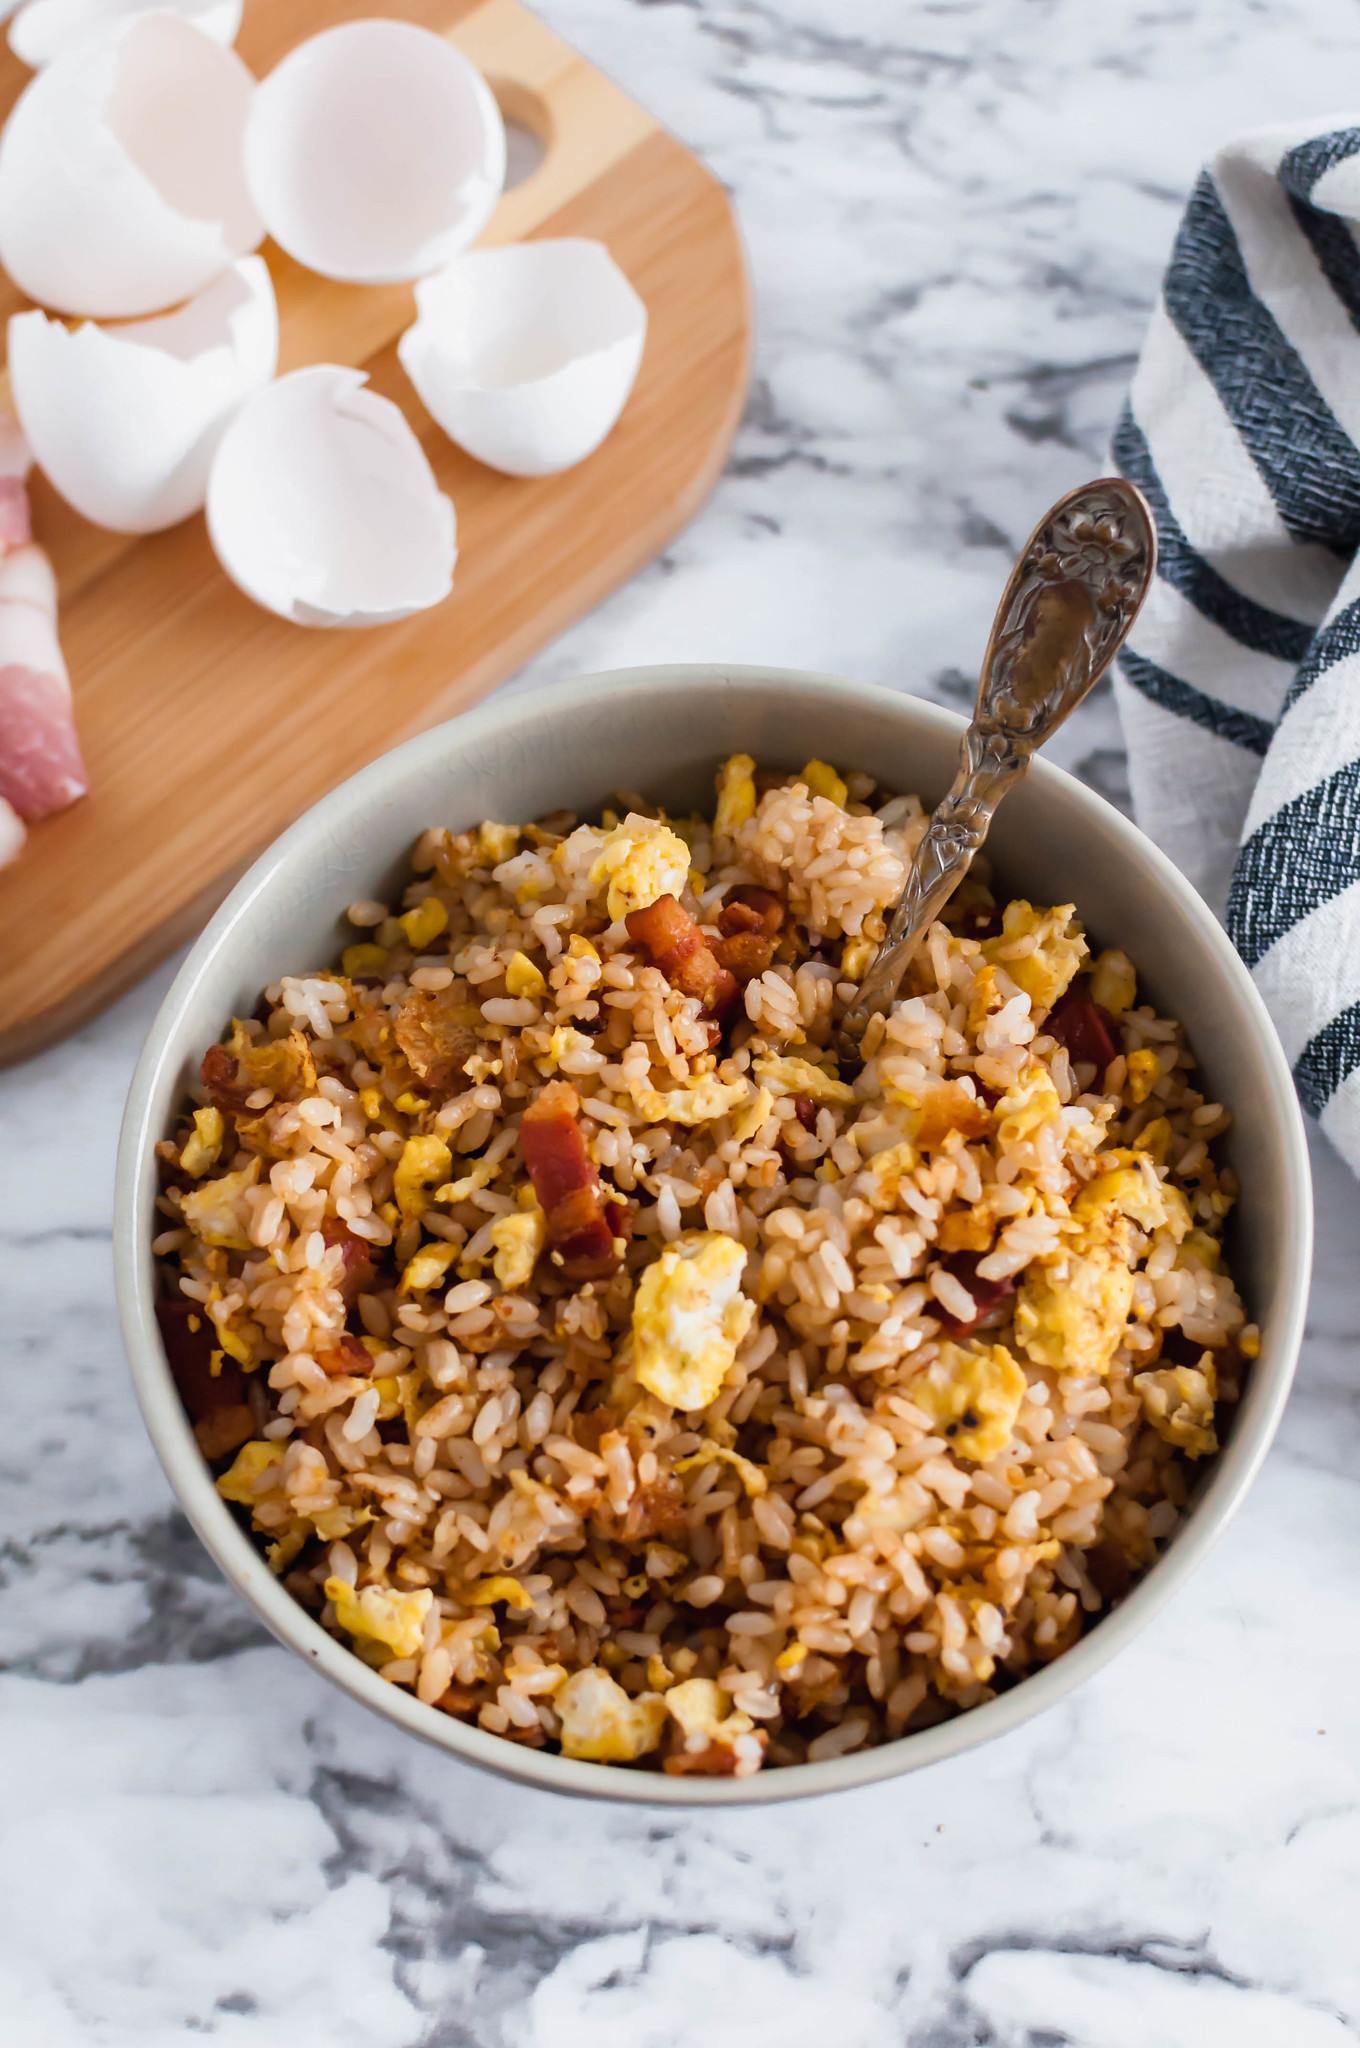 Rice isn't just for dinner. This breakfast fried rice is packed full of scrambled eggs and bacon. A popular recipe in 2020.